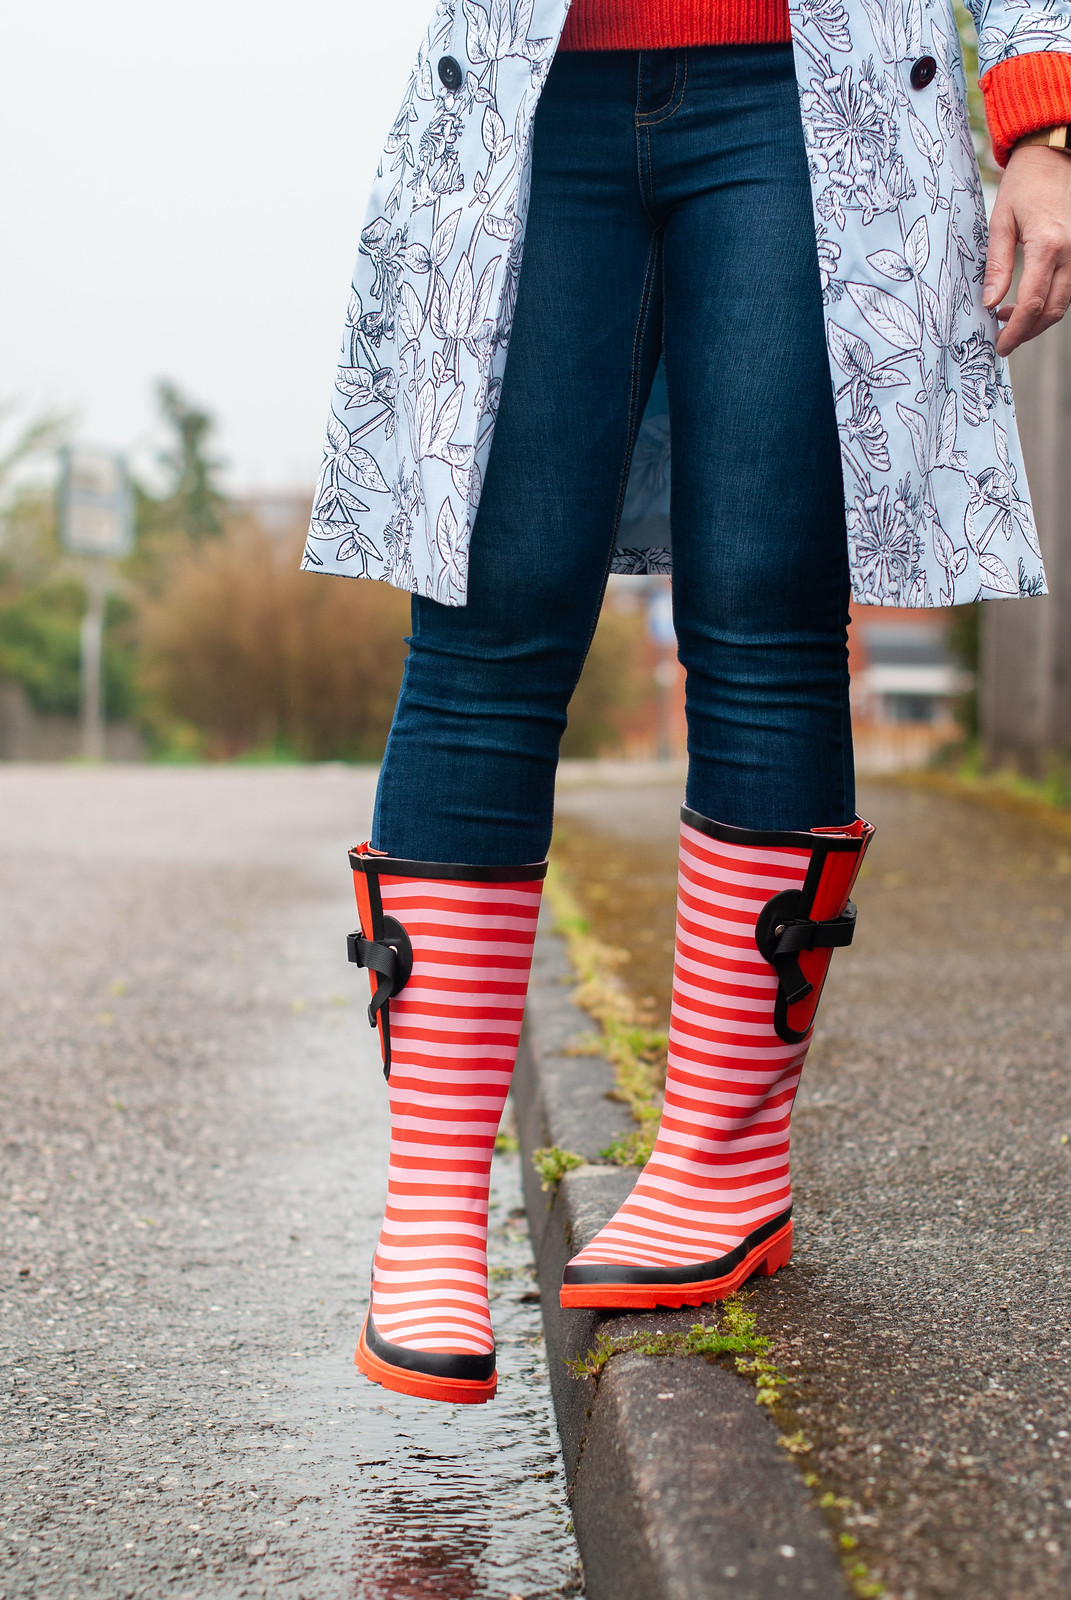 A Colourful Rainy Day Outfit With Wide Wellies - Spring Showers Outfit, Over 40 Fashion | Not Dressed As Lamb, over 40 fashion blog